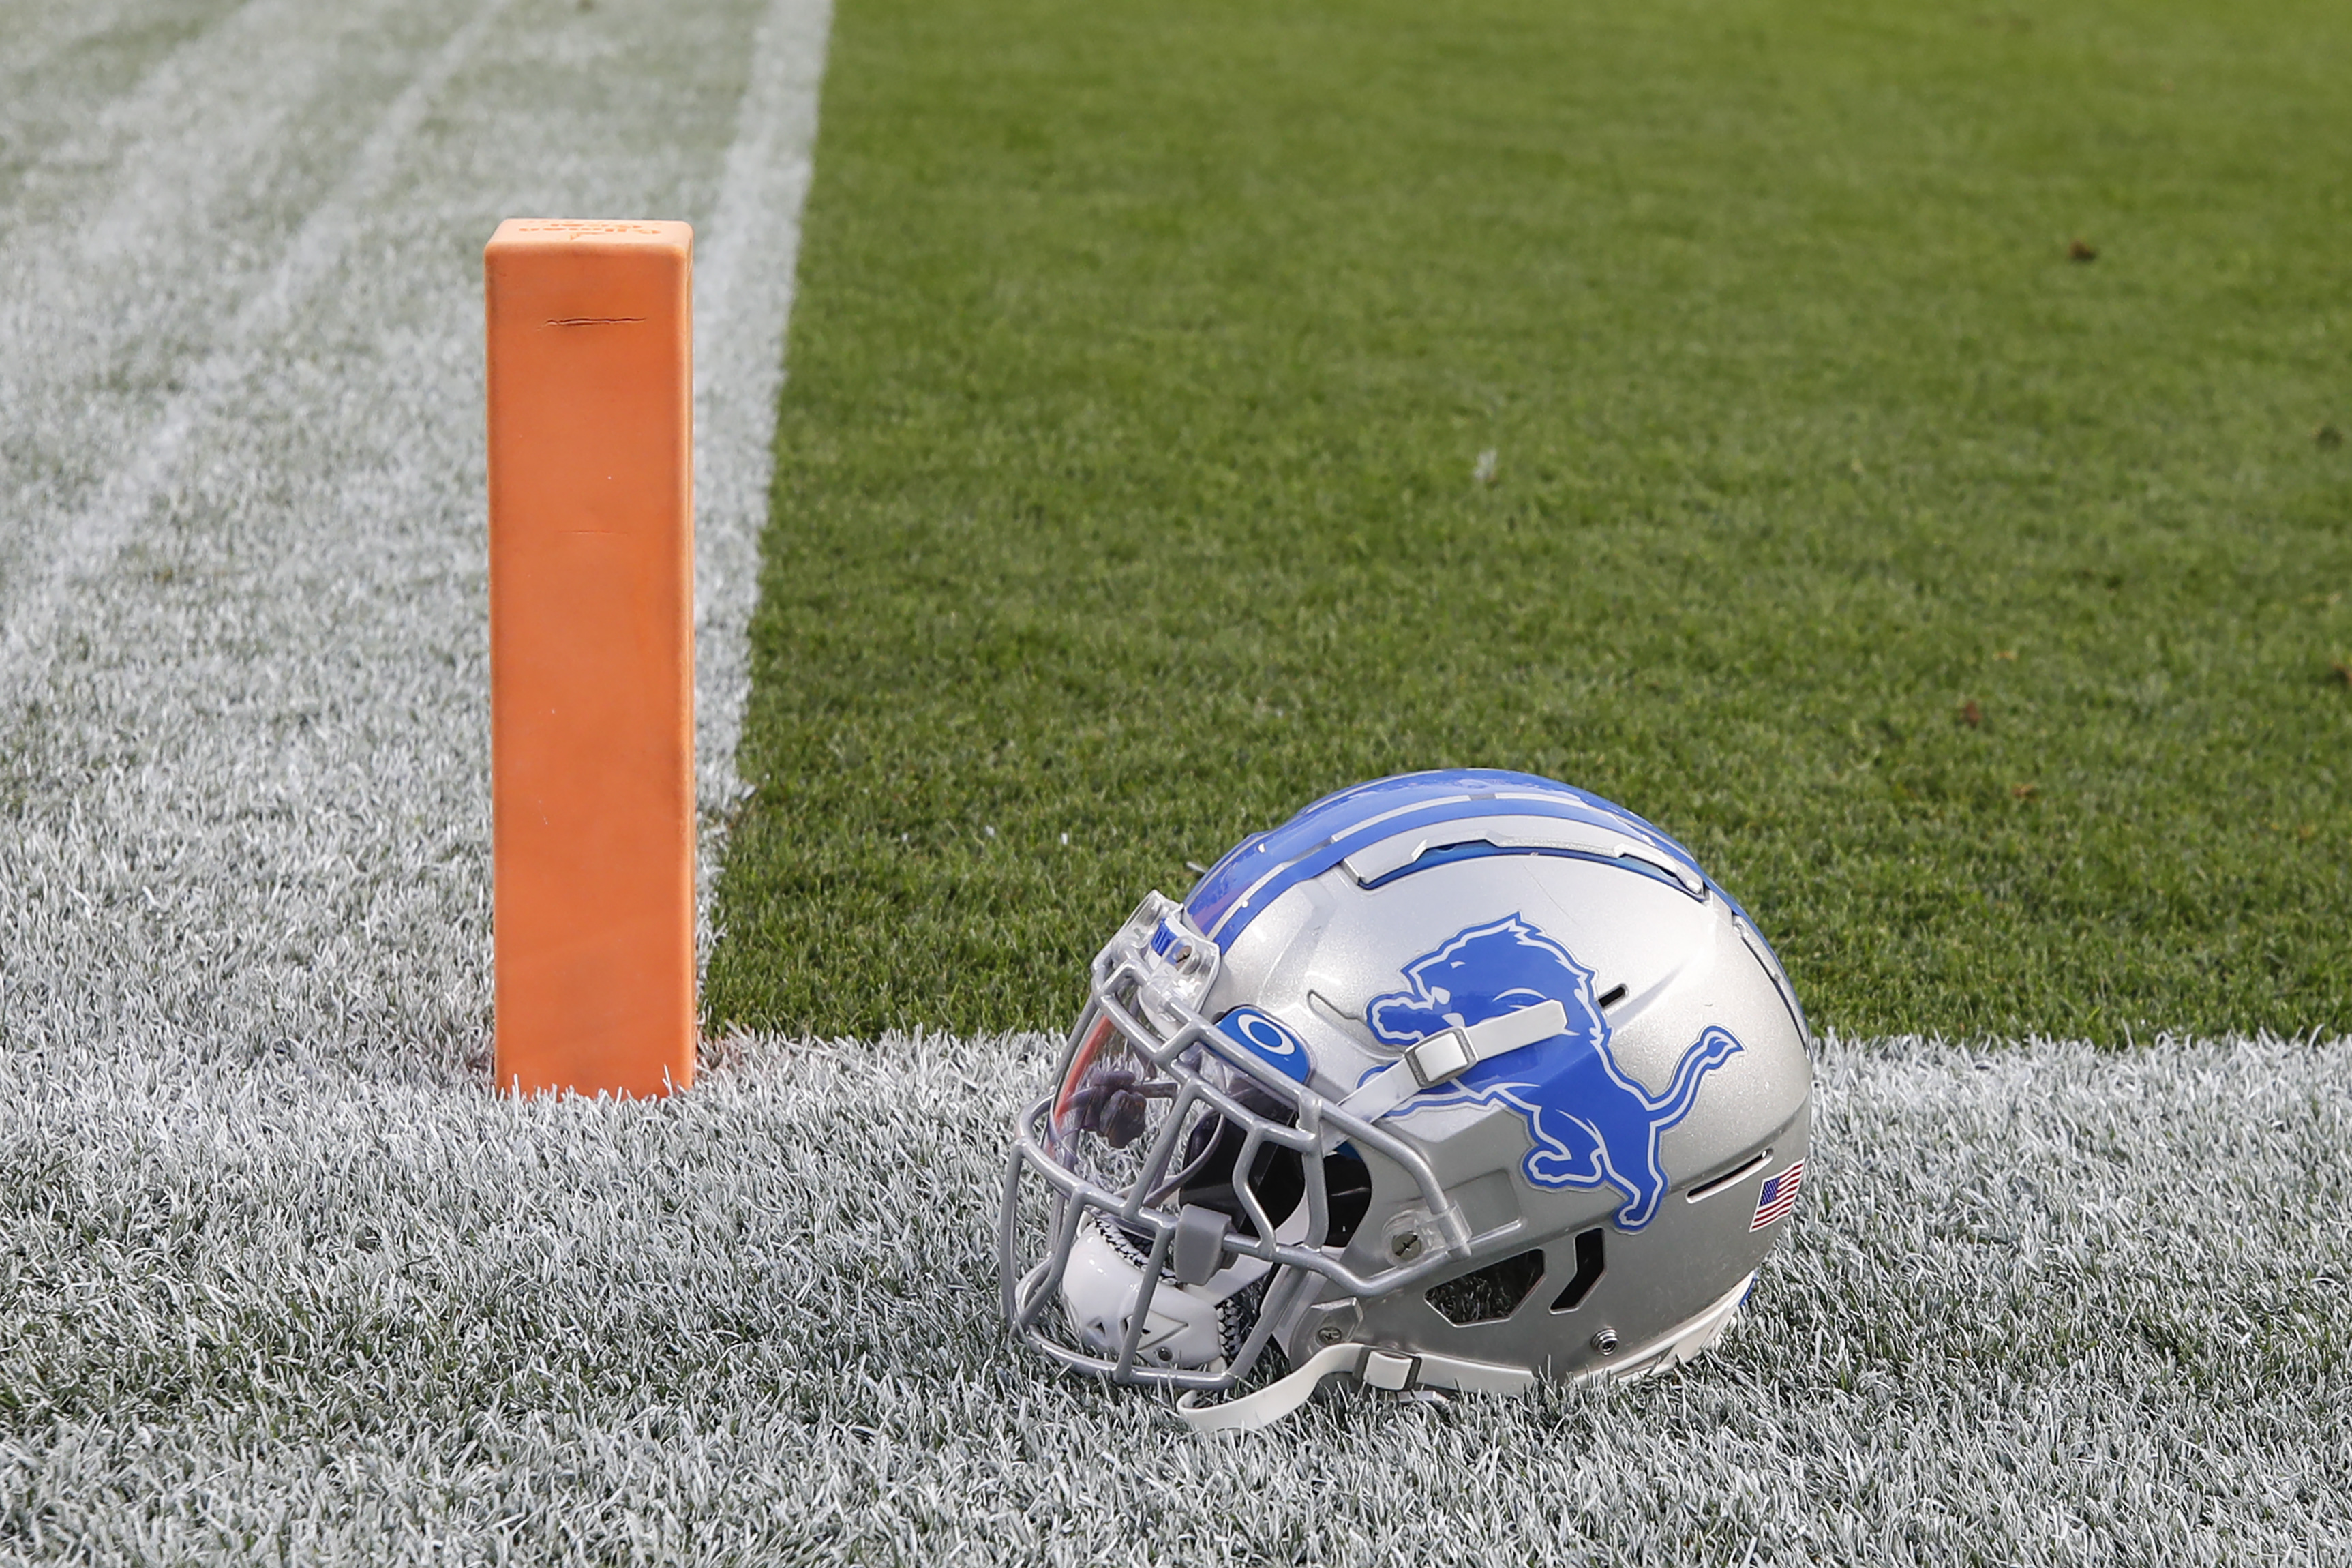 How to watch, stream, listen to every Detroit Lions game in 2021 NFL season  